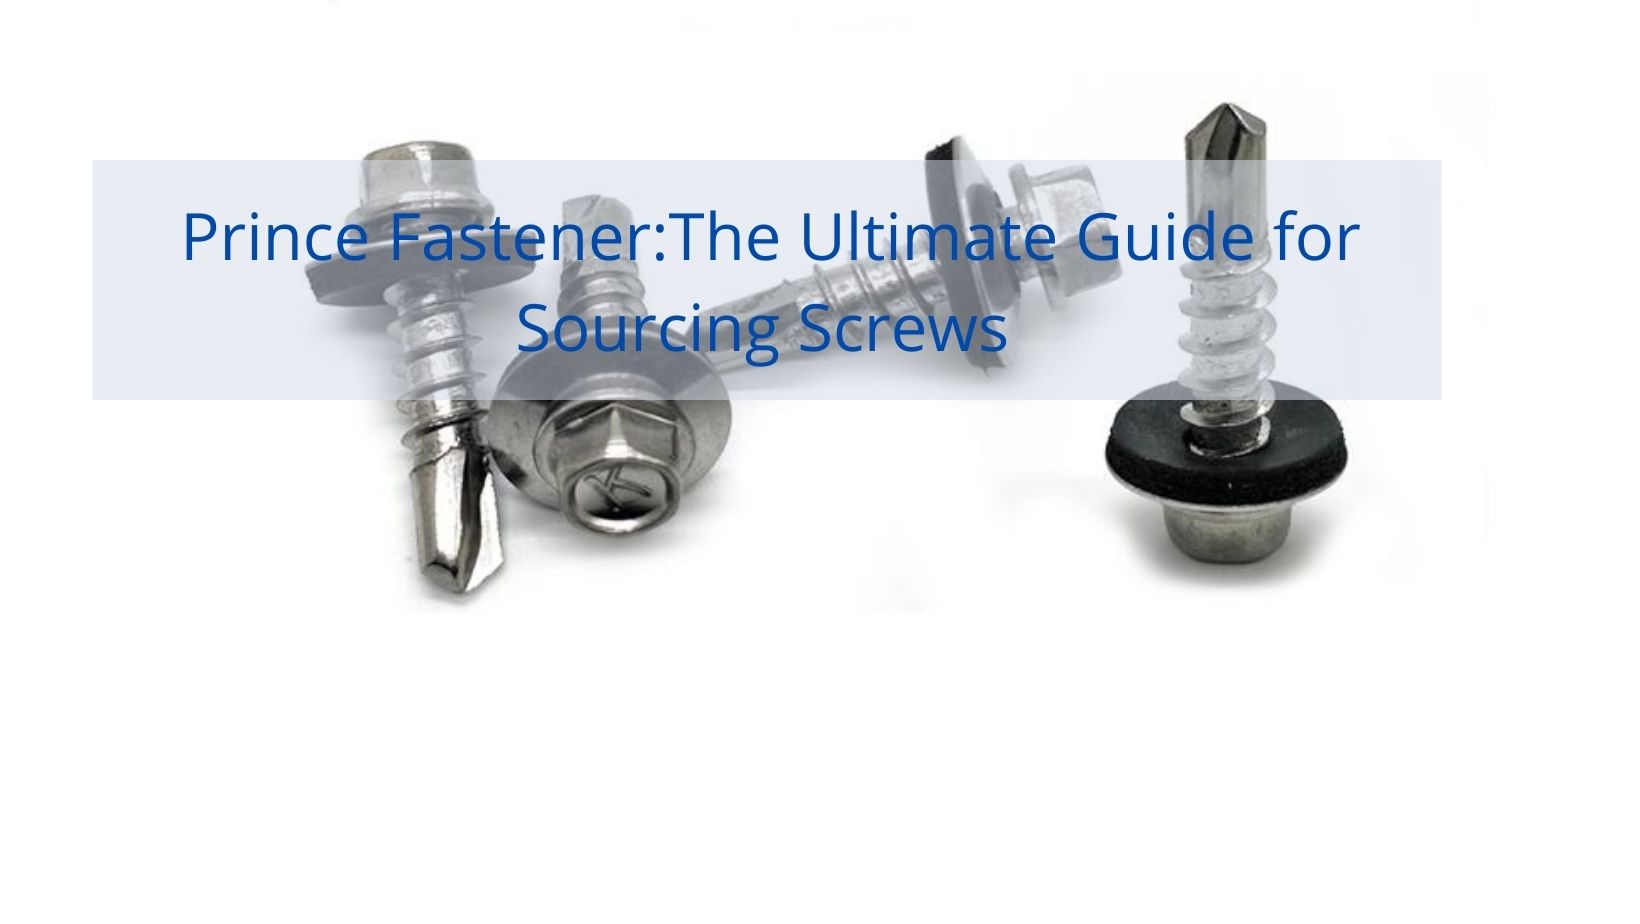 Prince FastenerThe Ultimate Guide for Sourcing Screws